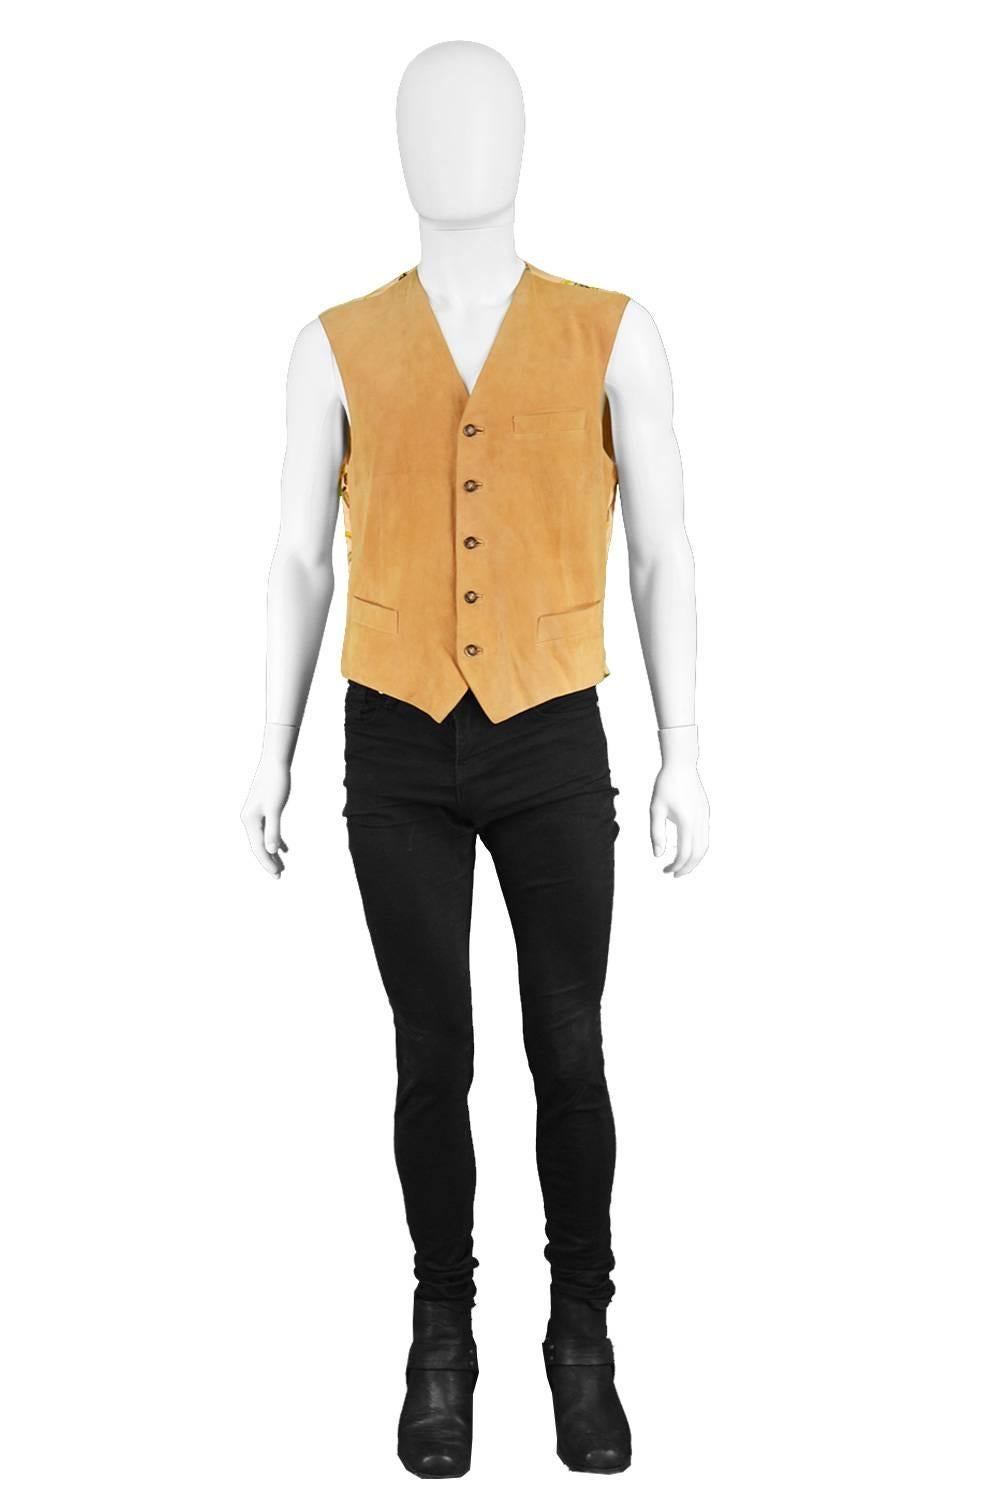 Gucci Vintage Men's Patterned Silk & Italian Suede Sleeveless Leather Vest, 1980s

Size: Marked 52 which is roughly a men's Large. Please check measurements.
Chest - 42” / 106cm
Waist - 40” / 101cm
Length (Shoulder to Hem) - 21” / 53cm

Condition: